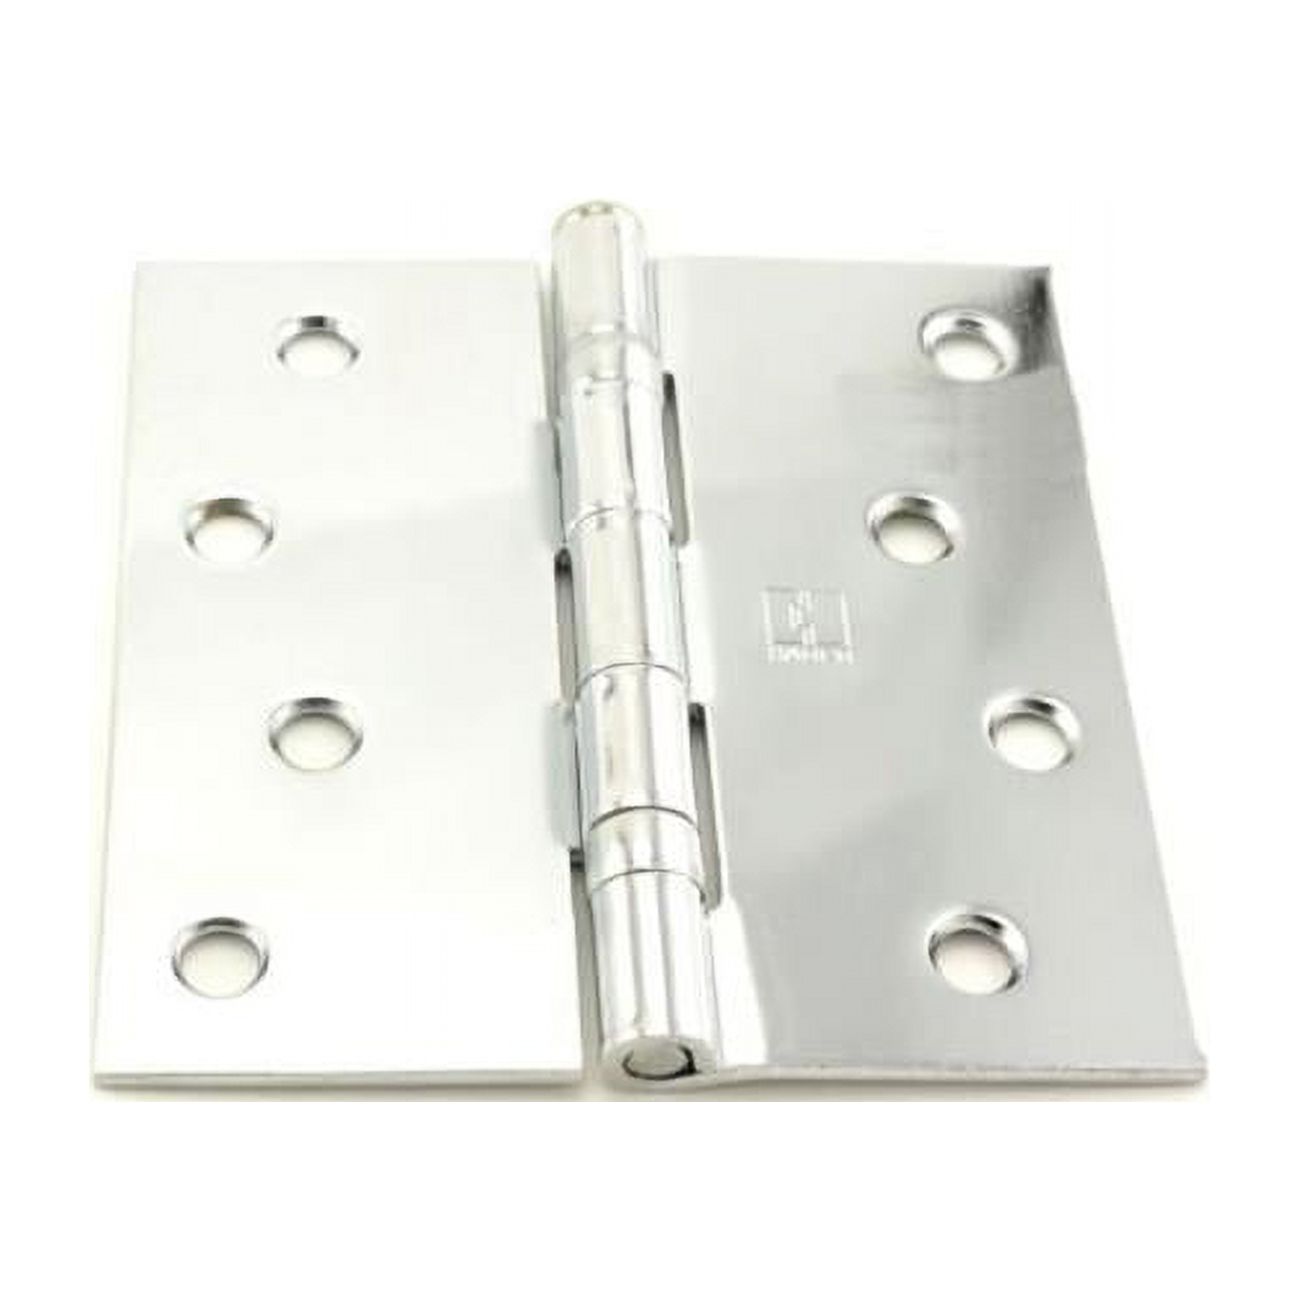 Hager  4 x 4 in. Square Corner Ball Bearing Full Mortise Residential Weight Hinge, No. 034477 Bright Chrome - image 1 of 1